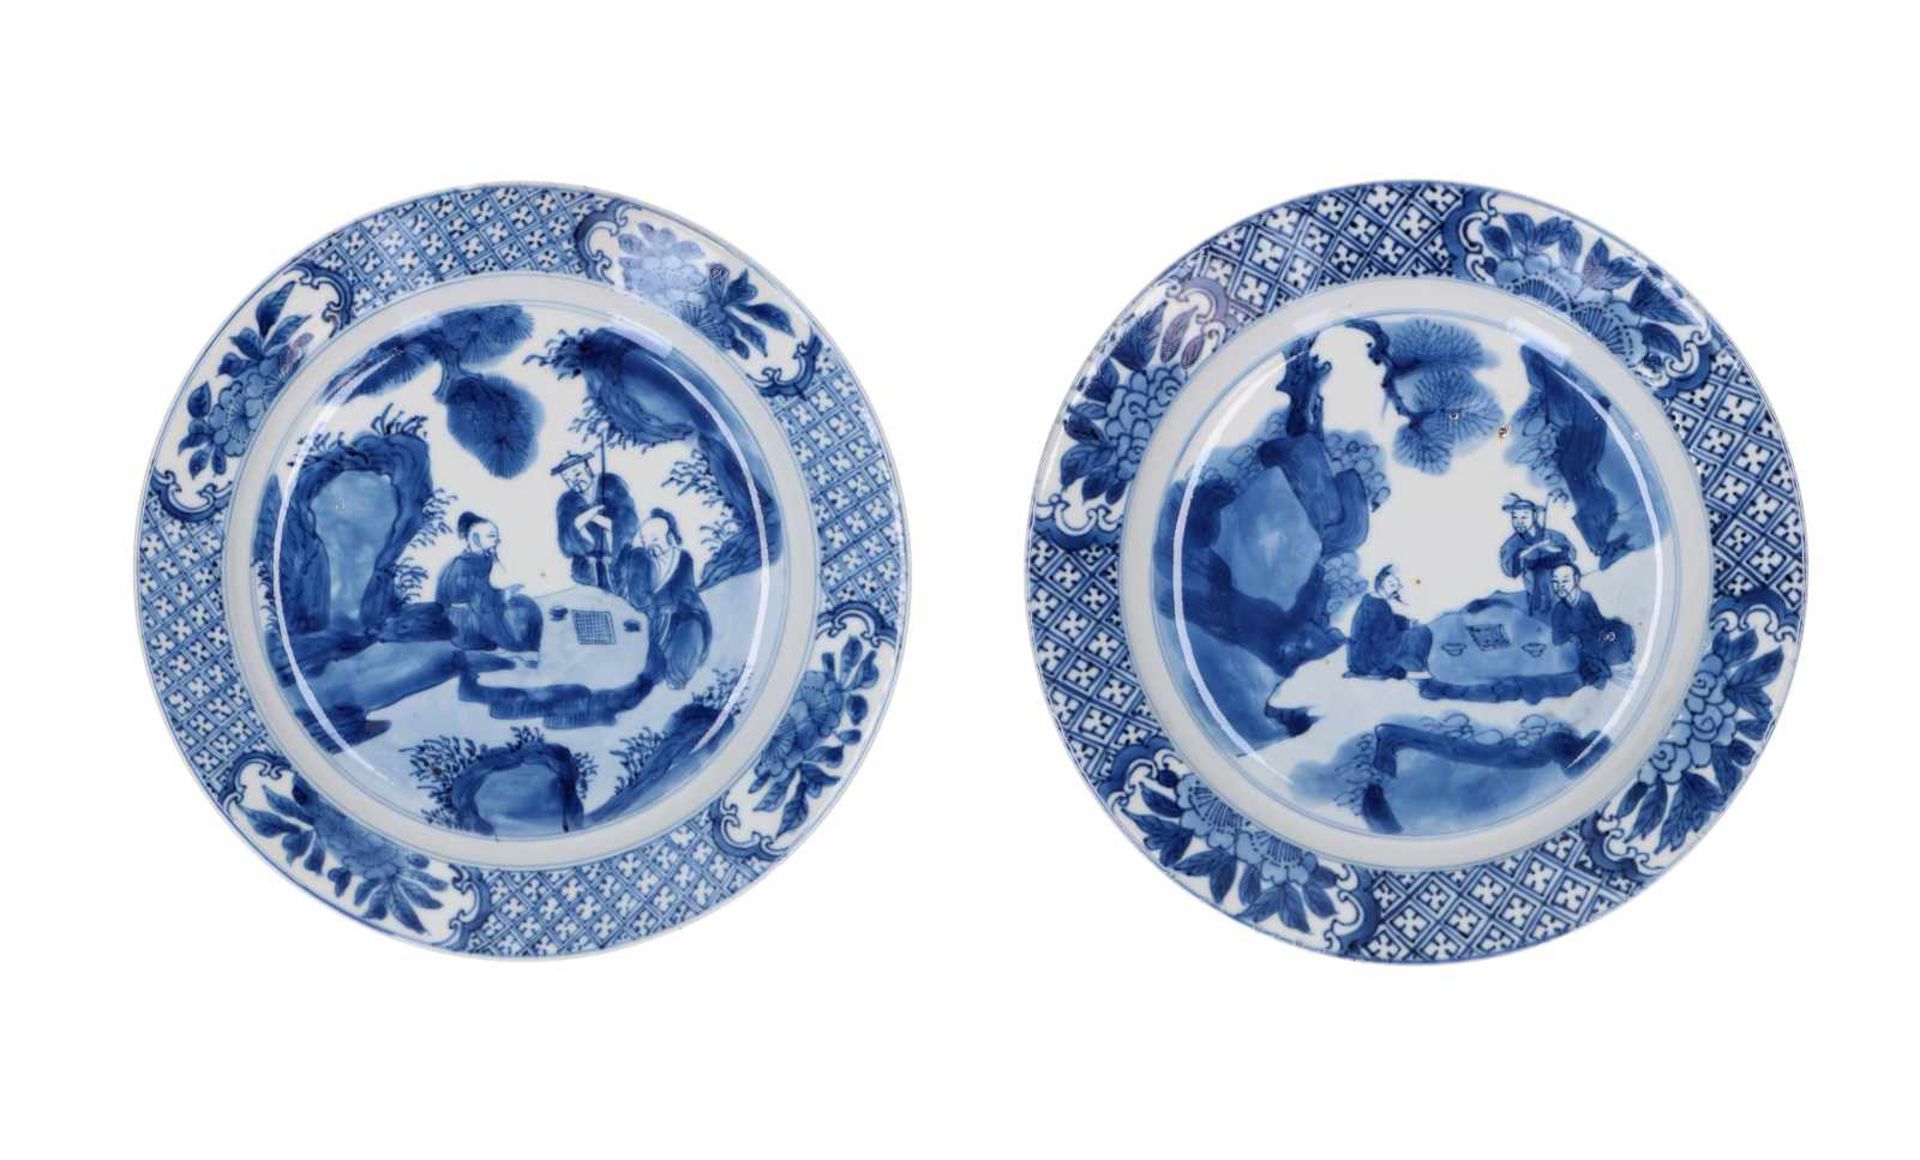 Two blue and white porcelain dishes, decorated with figures in a garden. Marked with 4-character